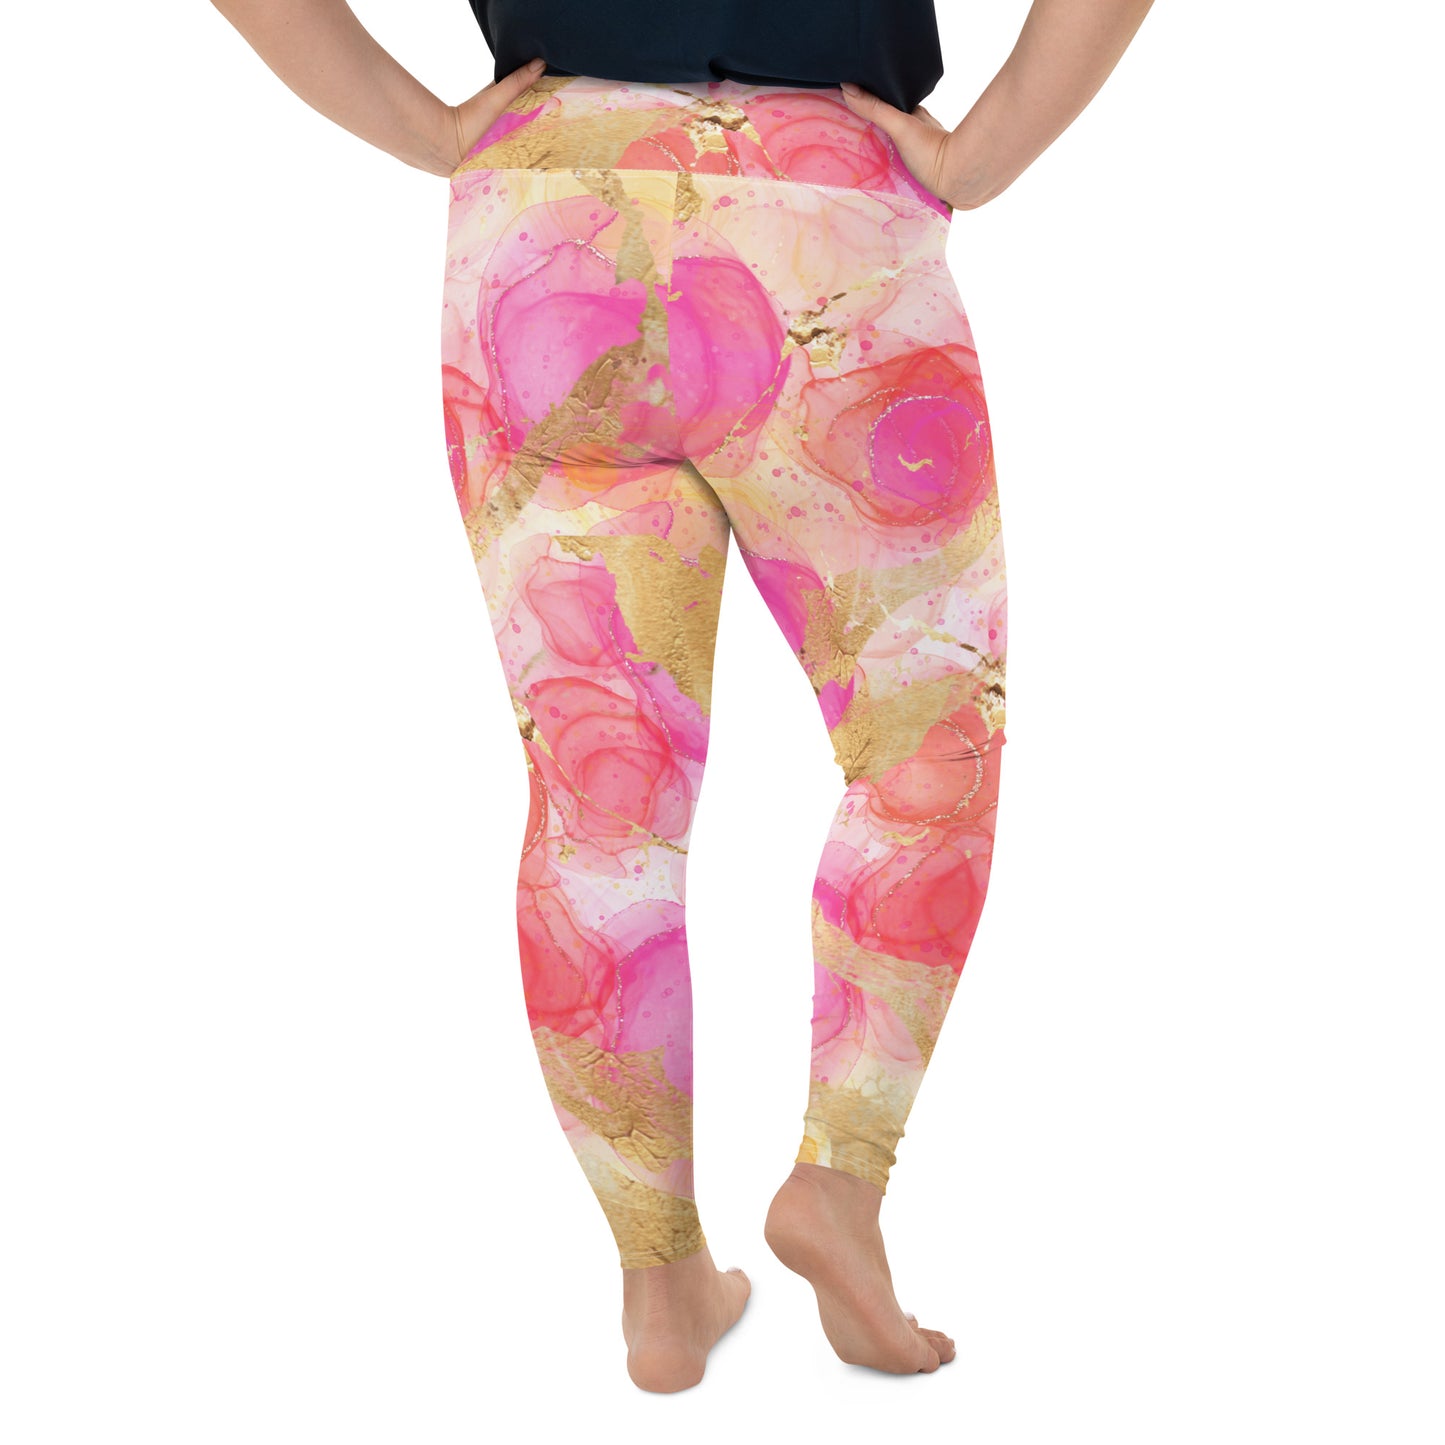 Soft Fabric Wide Elastic Waist Flattering fit Plus Size Leggings - "Carnival Collection"